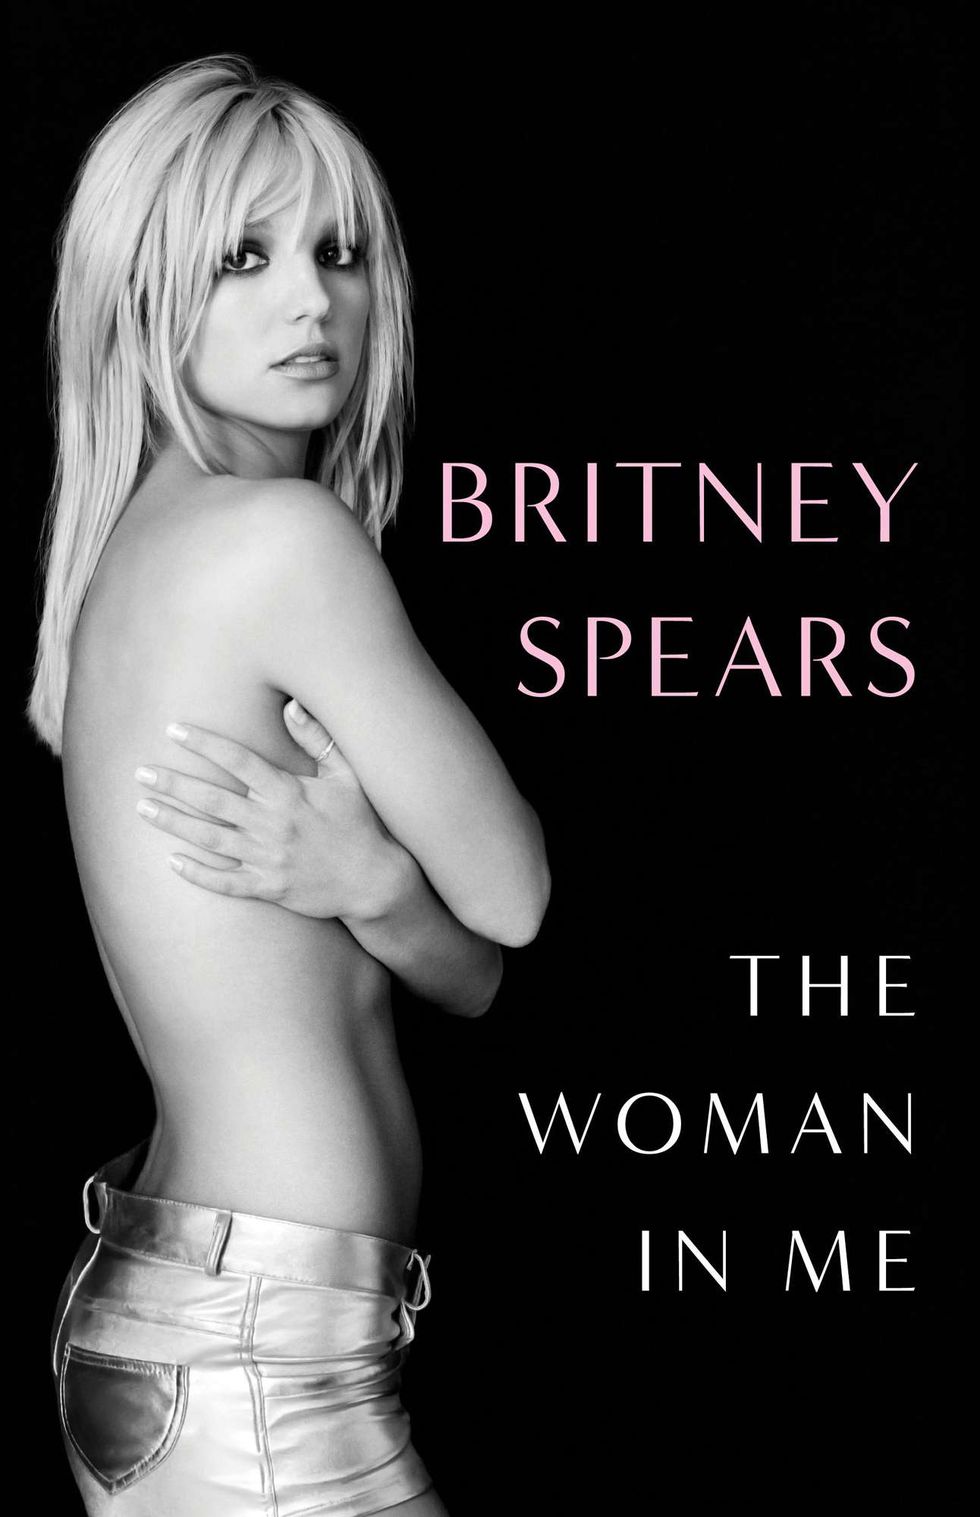 britney spears memoir release date and information